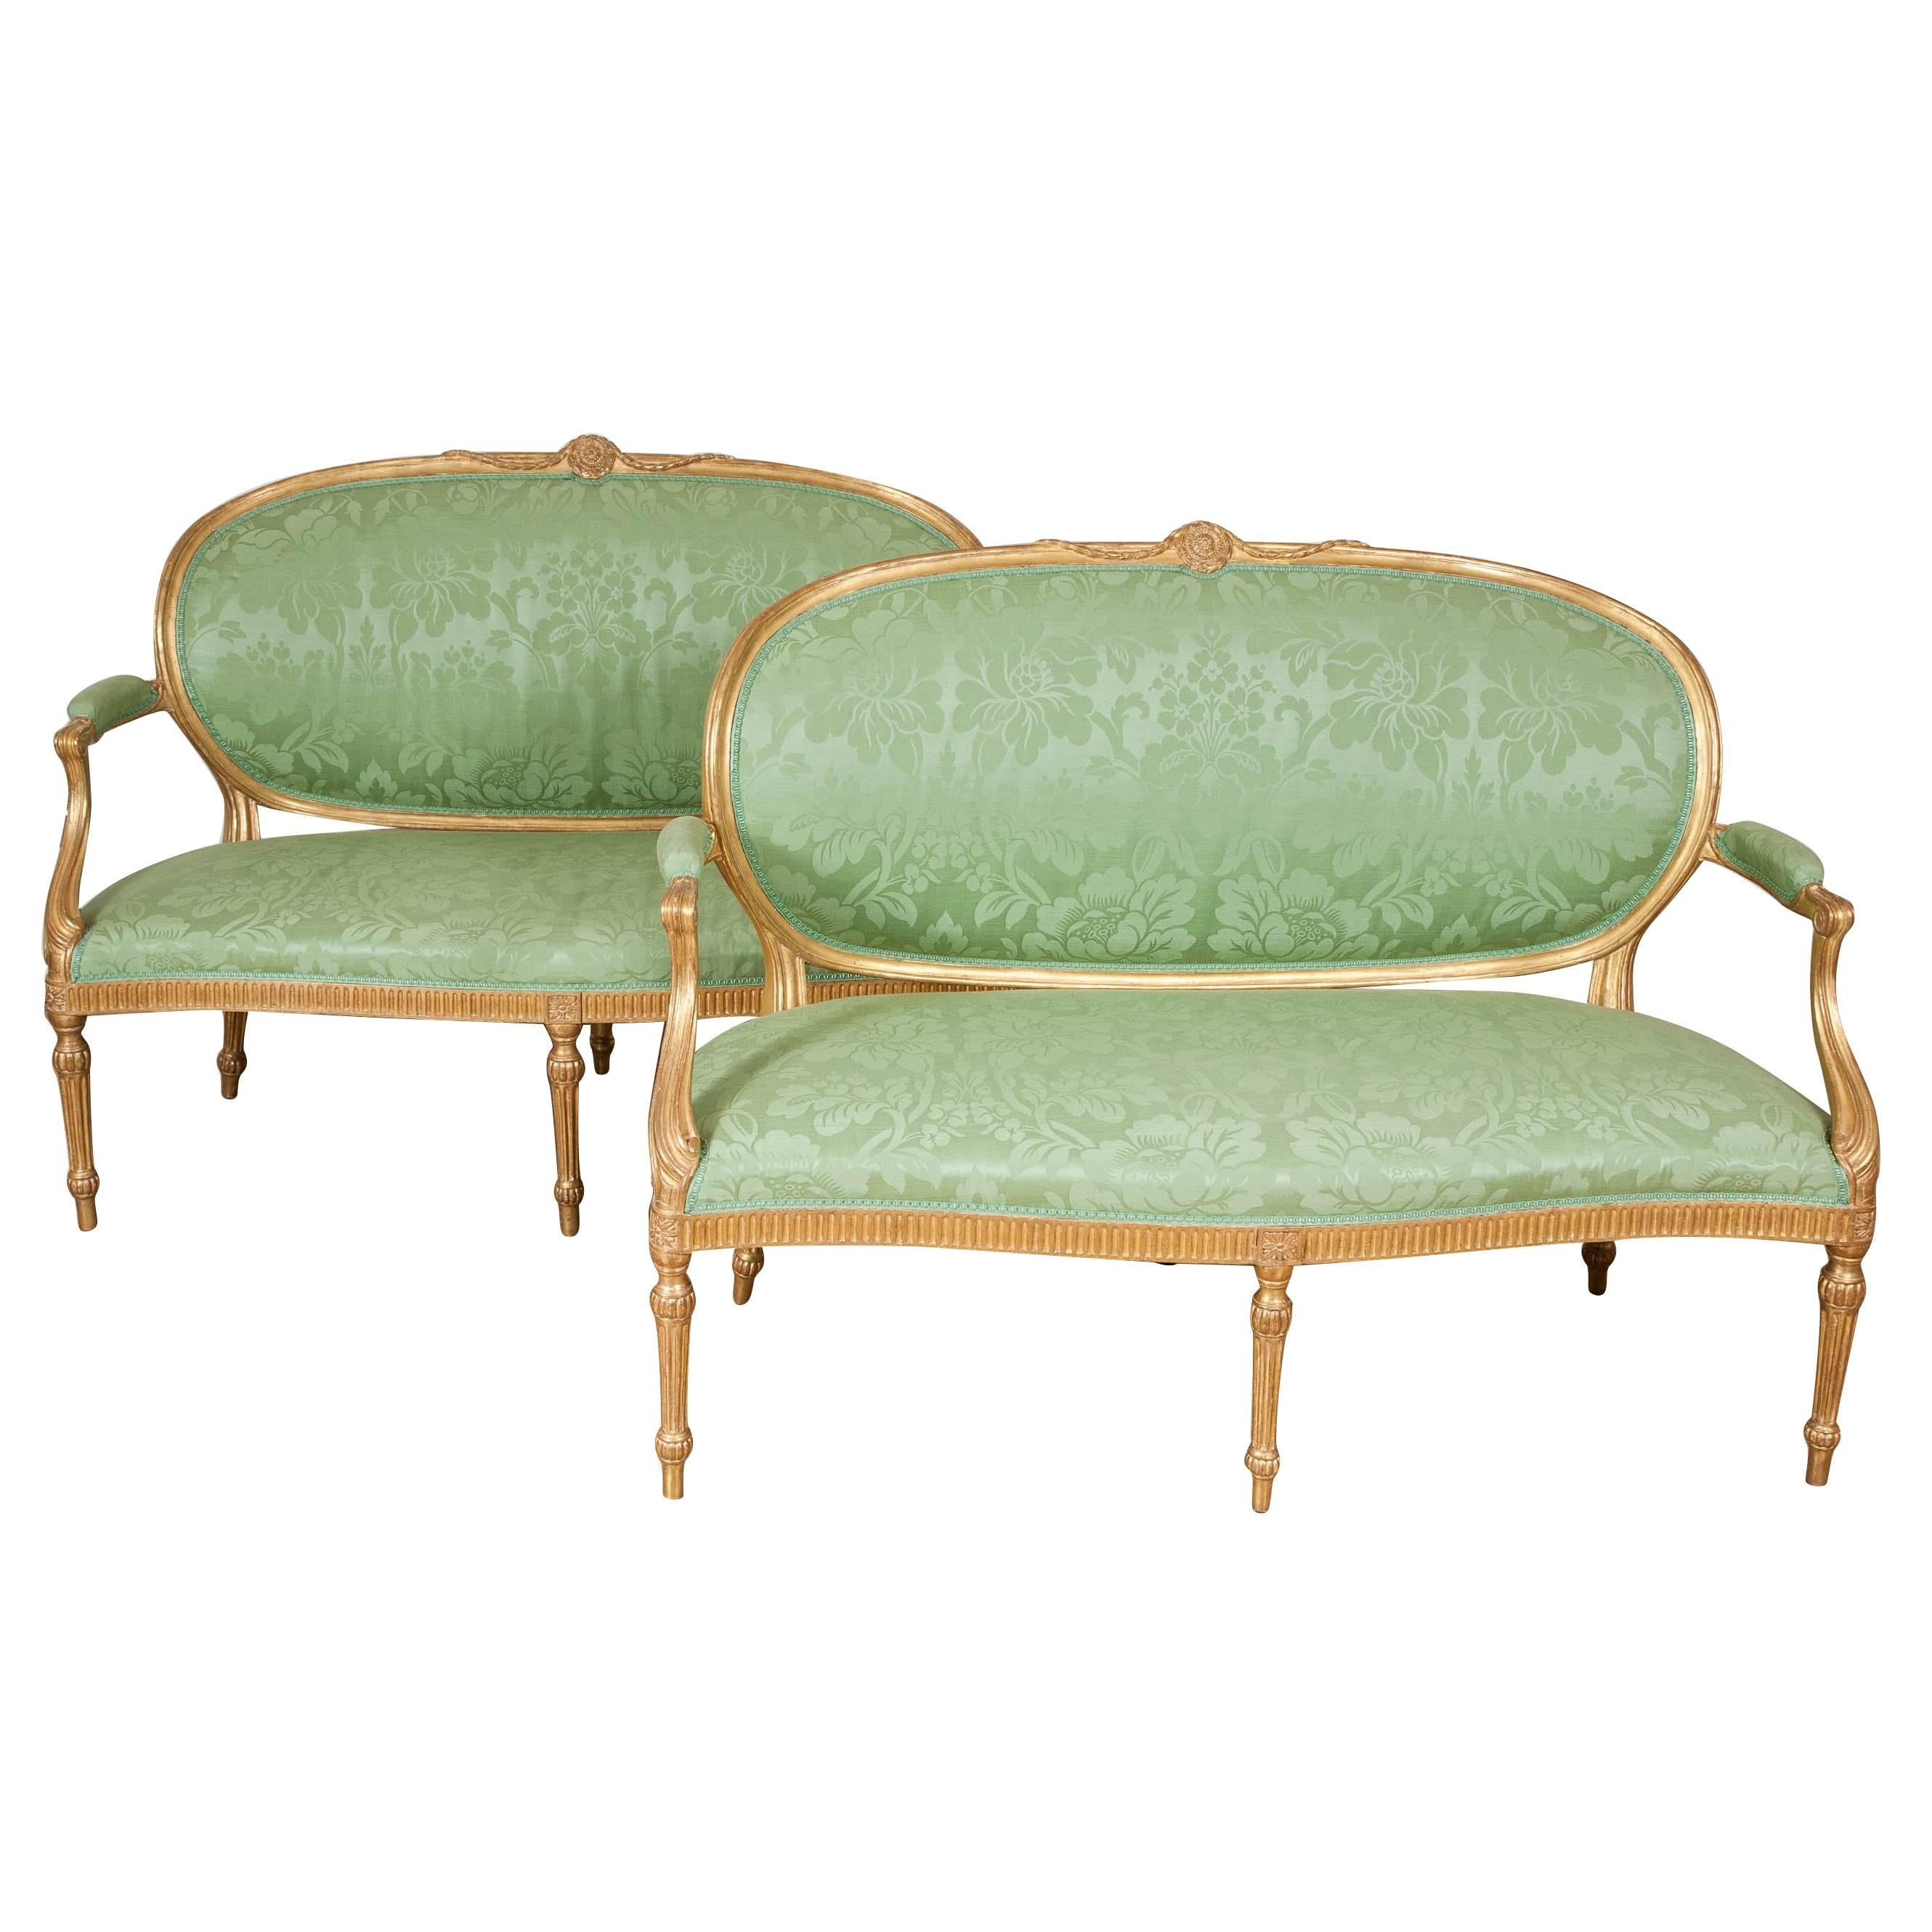 Pair of Carved Giltwood Settees, 18th Century Attributable to Thomas Chippendale For Sale